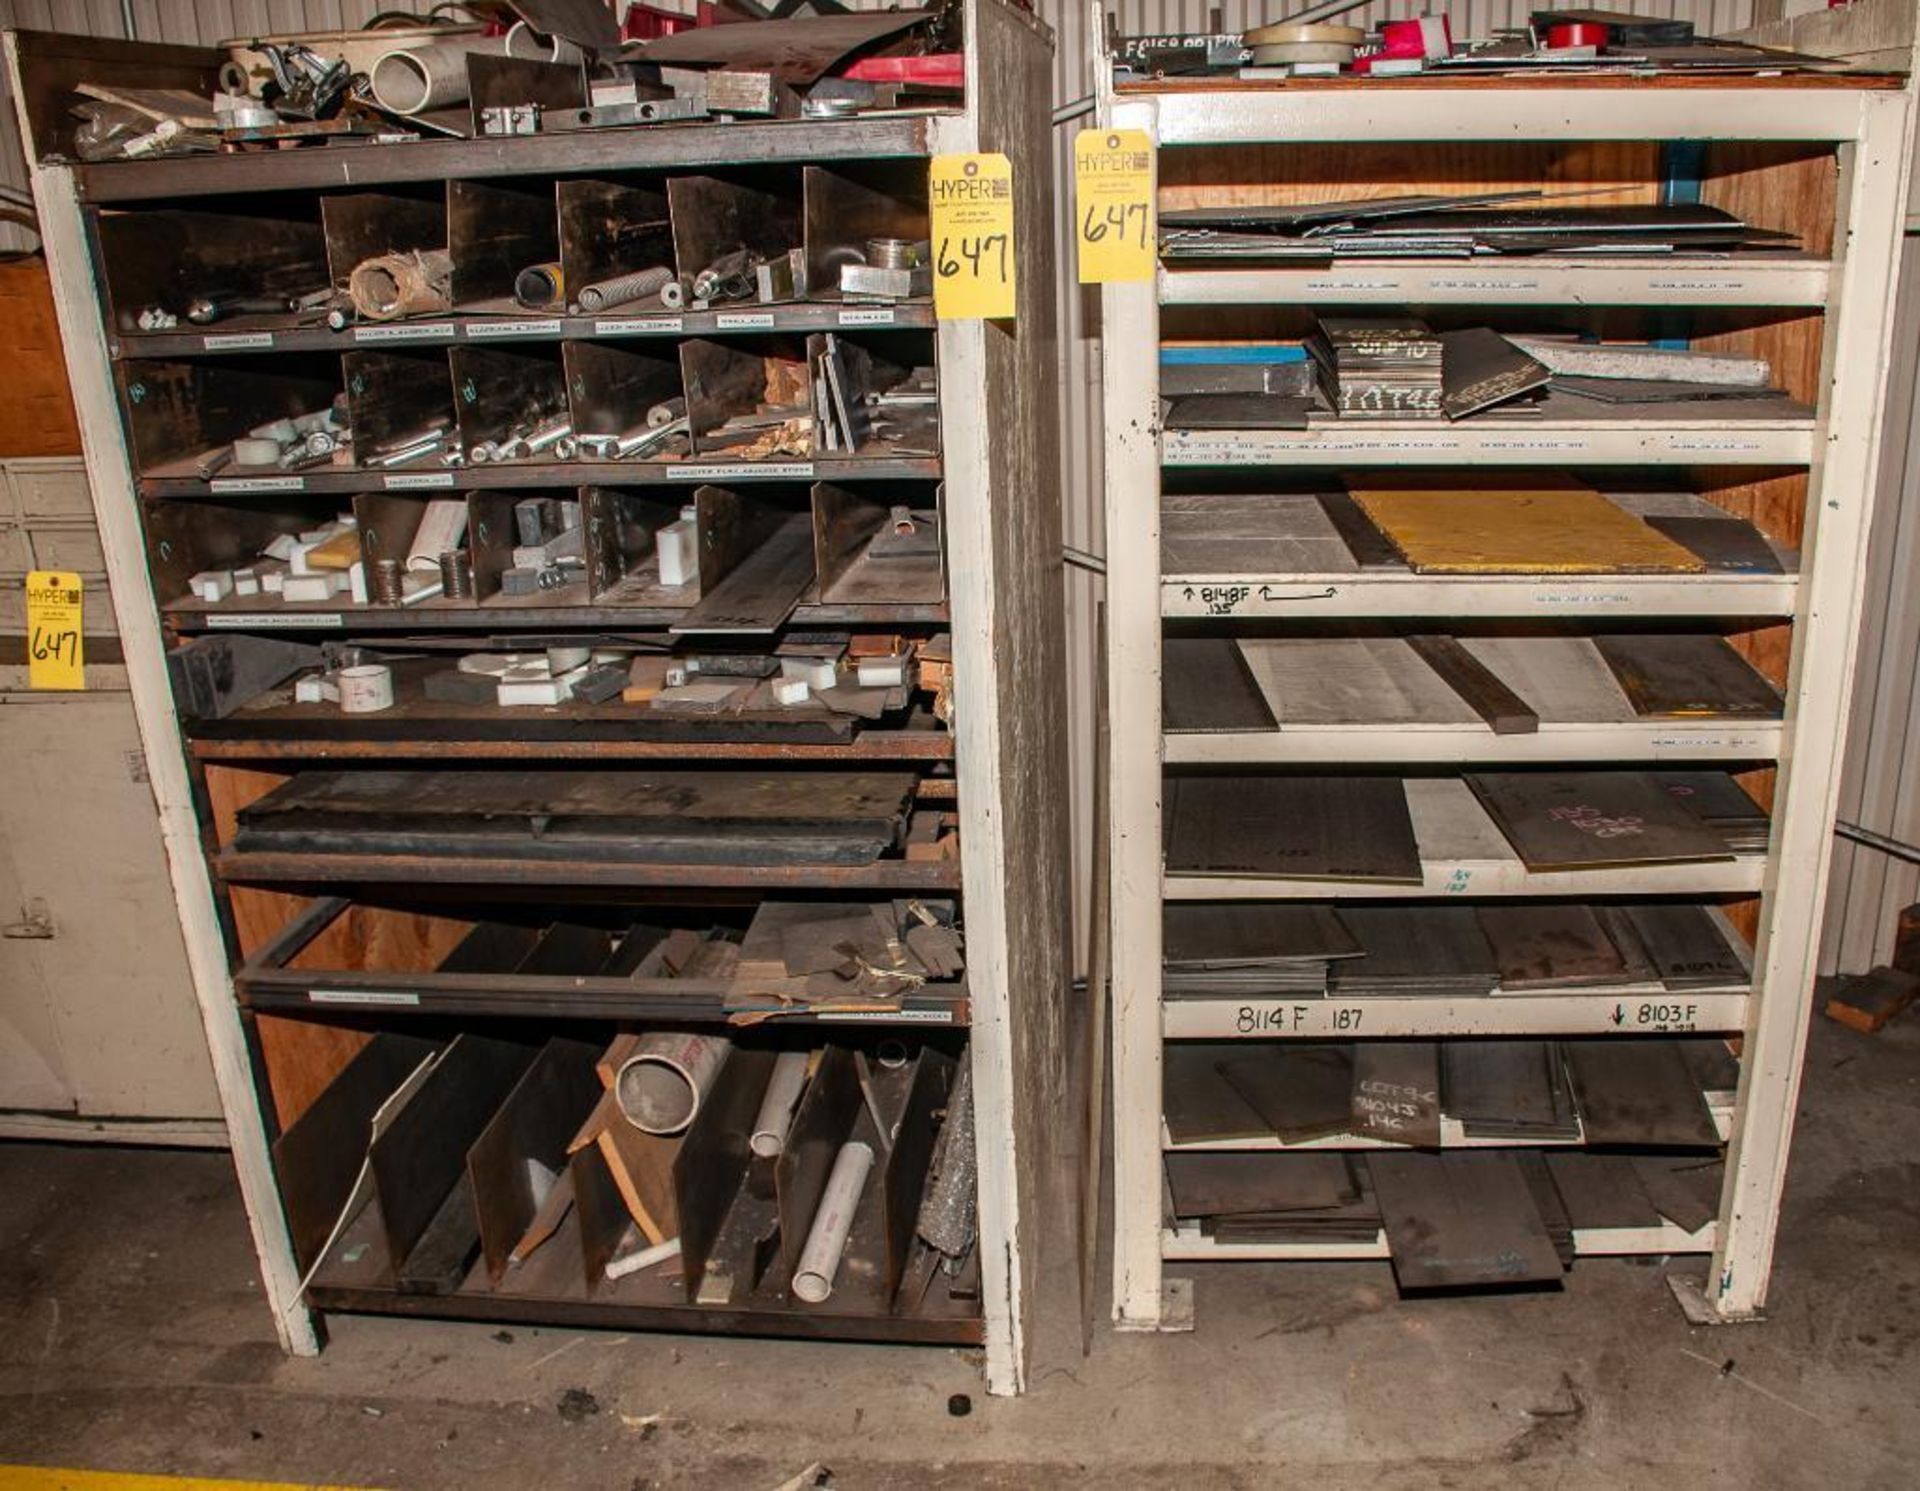 Metal shelves, Rolling Tables, Cabinets with contents